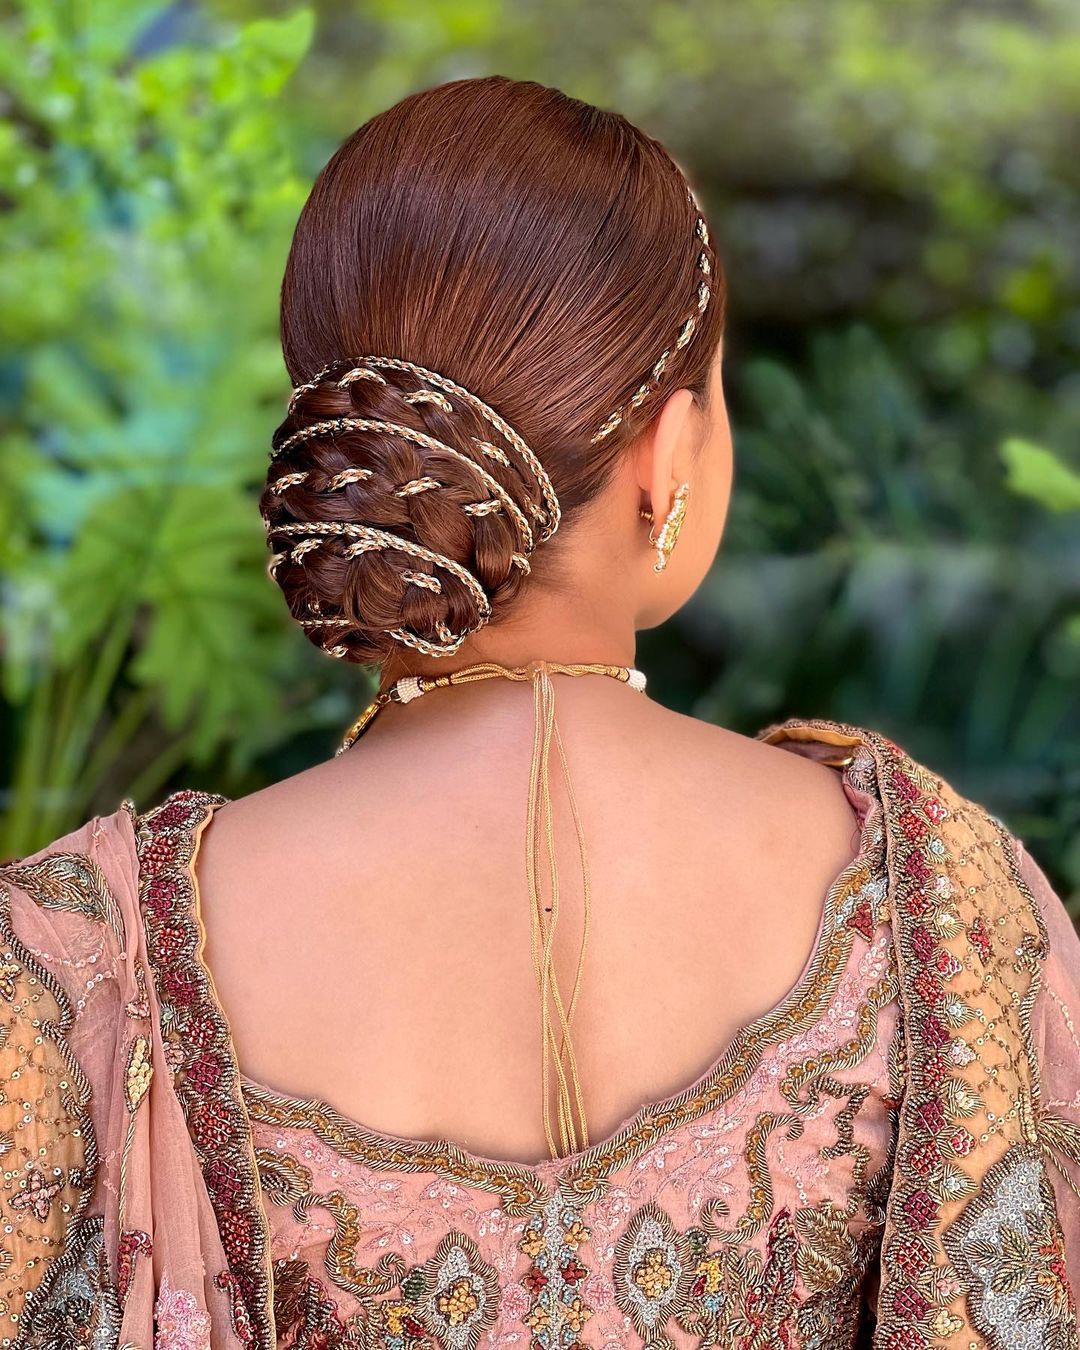 𝓤𝓷𝔀𝓻𝓲𝓽𝓽𝓮𝓷 𝓓𝓮𝓼𝓽𝓲𝓷𝔂 ✓ | Bride hairstyles, Reception hairstyles,  Engagement hairstyles